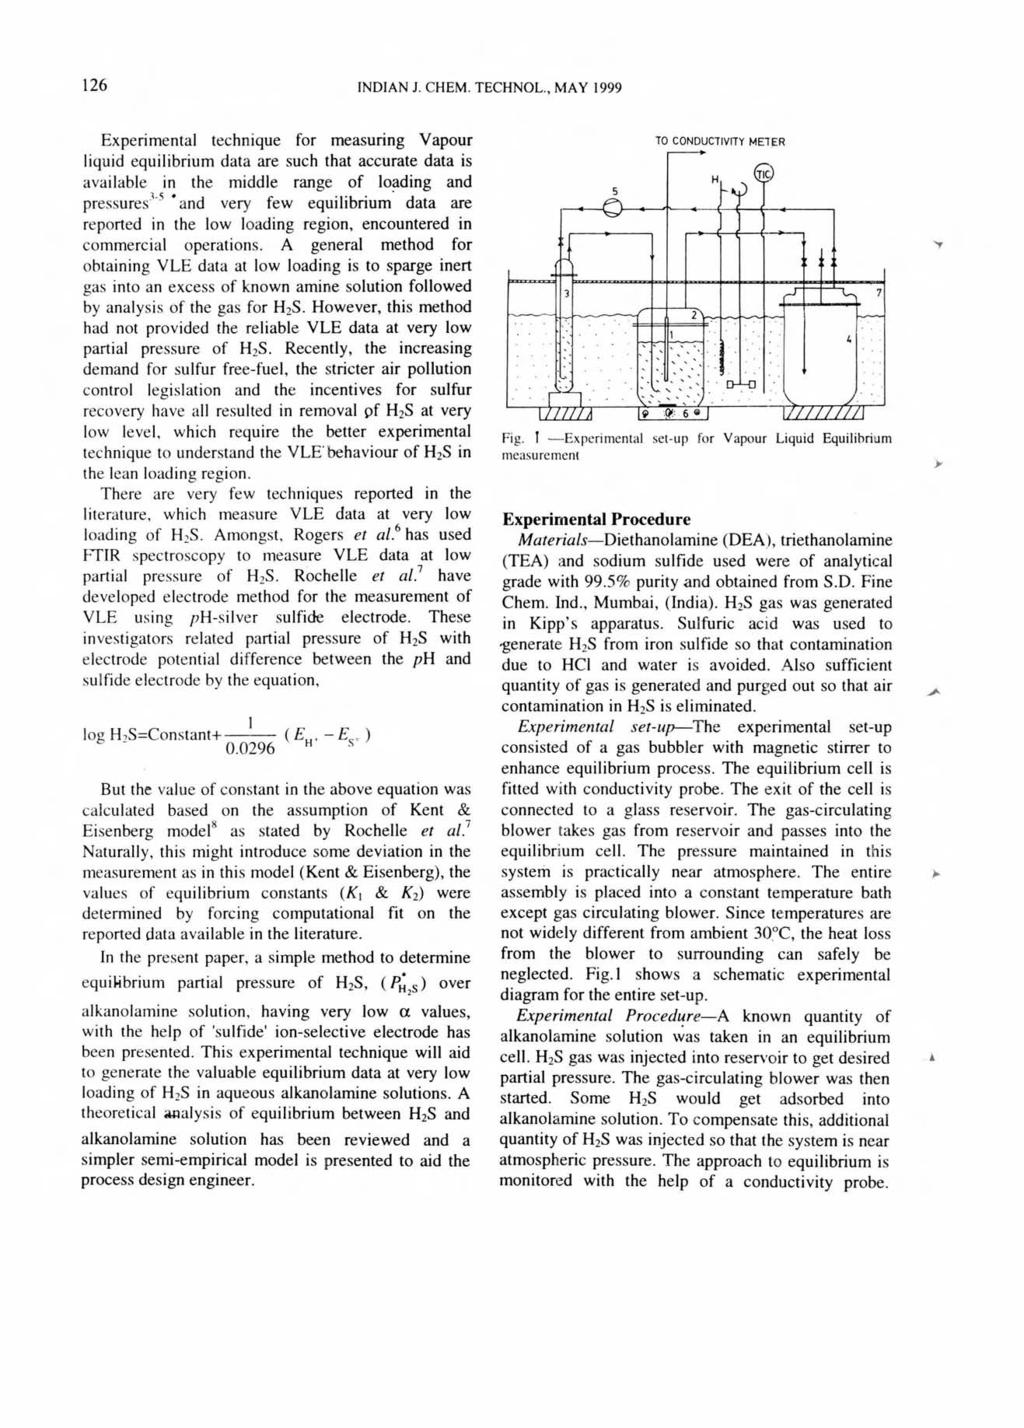 16 INDIAN 1. CHEM. TECHNOL., MAY 1999 Experimental technique for measuring Vapour liquid equilibrium data are such that accurate data is available in the middle range of loading and pressures.